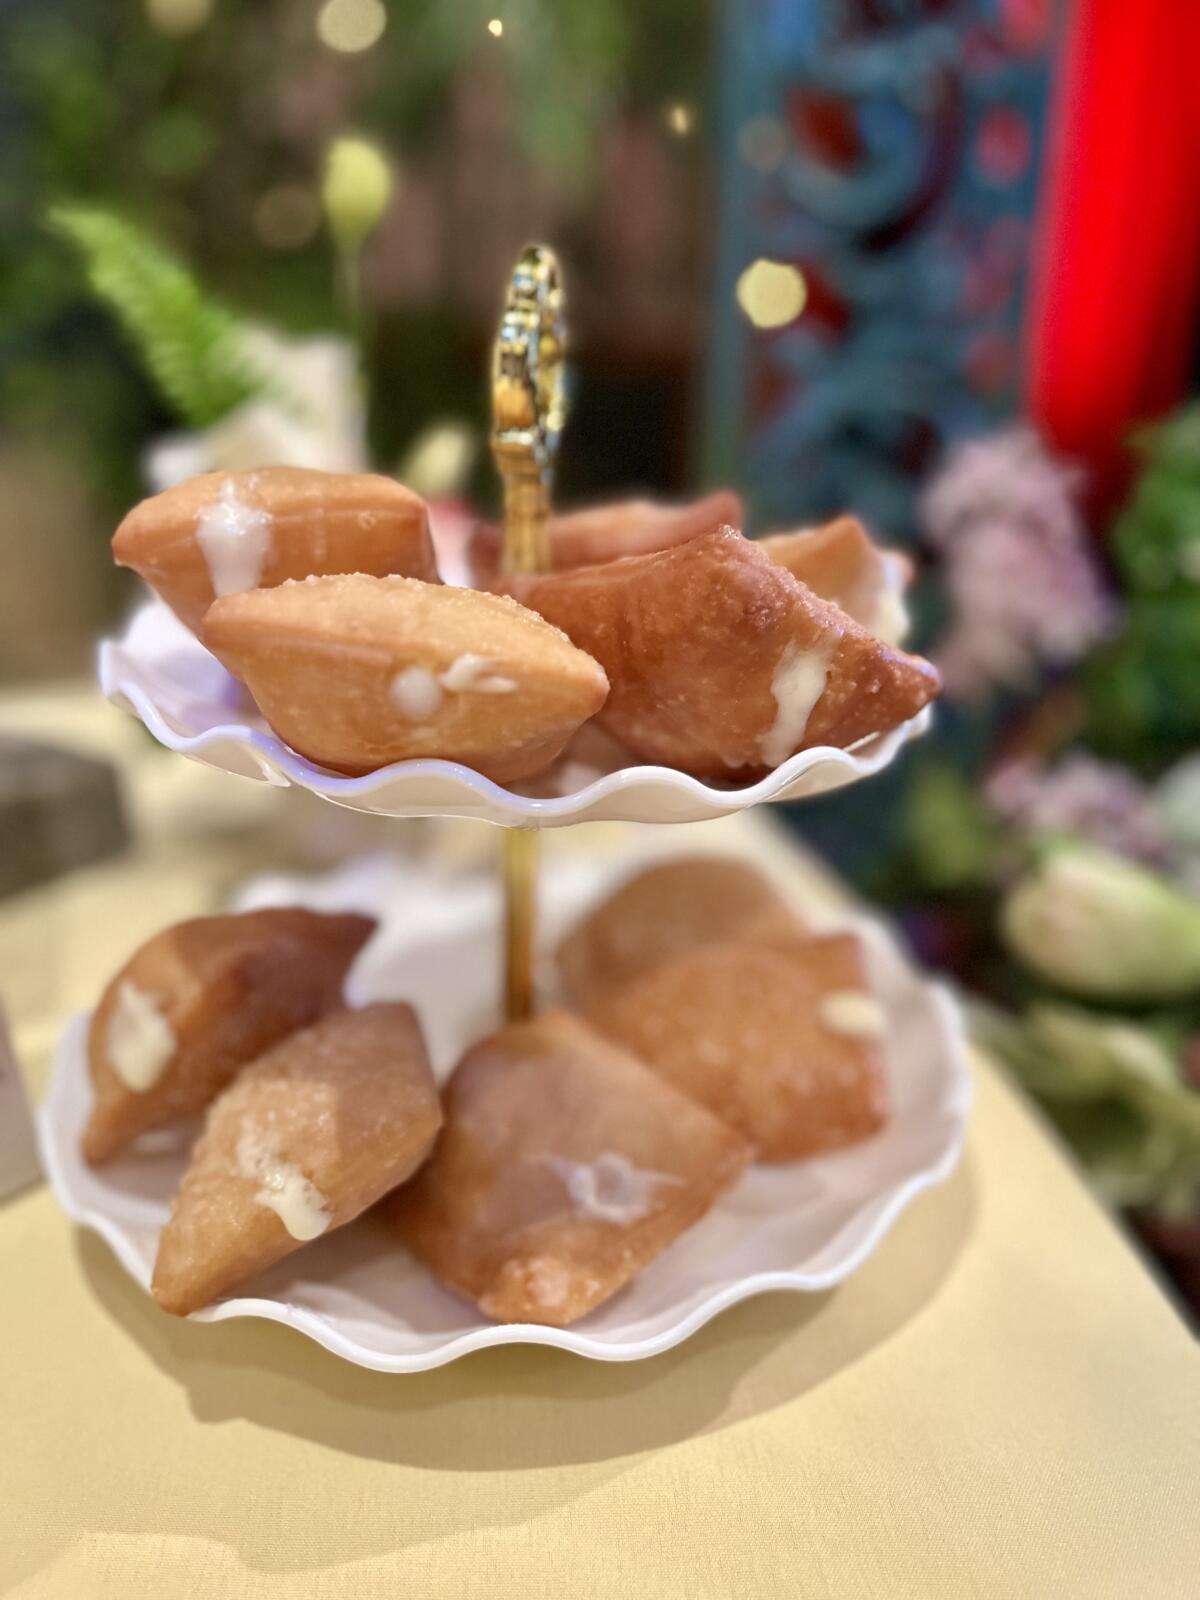 Tiana’s Palace will feature house-filled beignet.